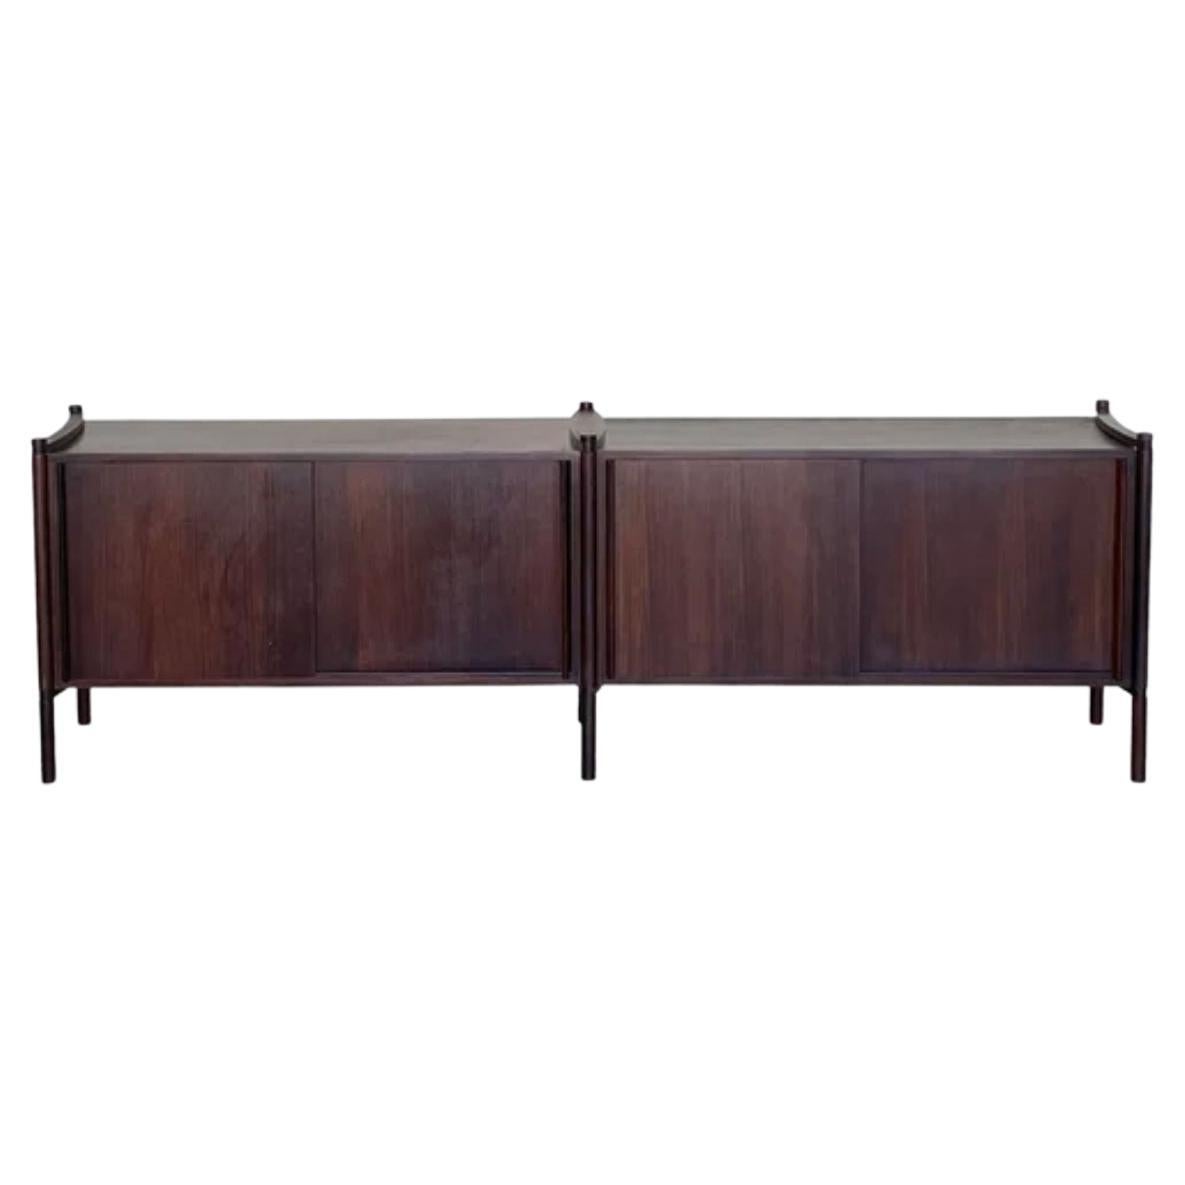 Modular "Archimede" Storage Unit / Credenza in Rosewood by Hirozi Fukuoh, 1962 For Sale